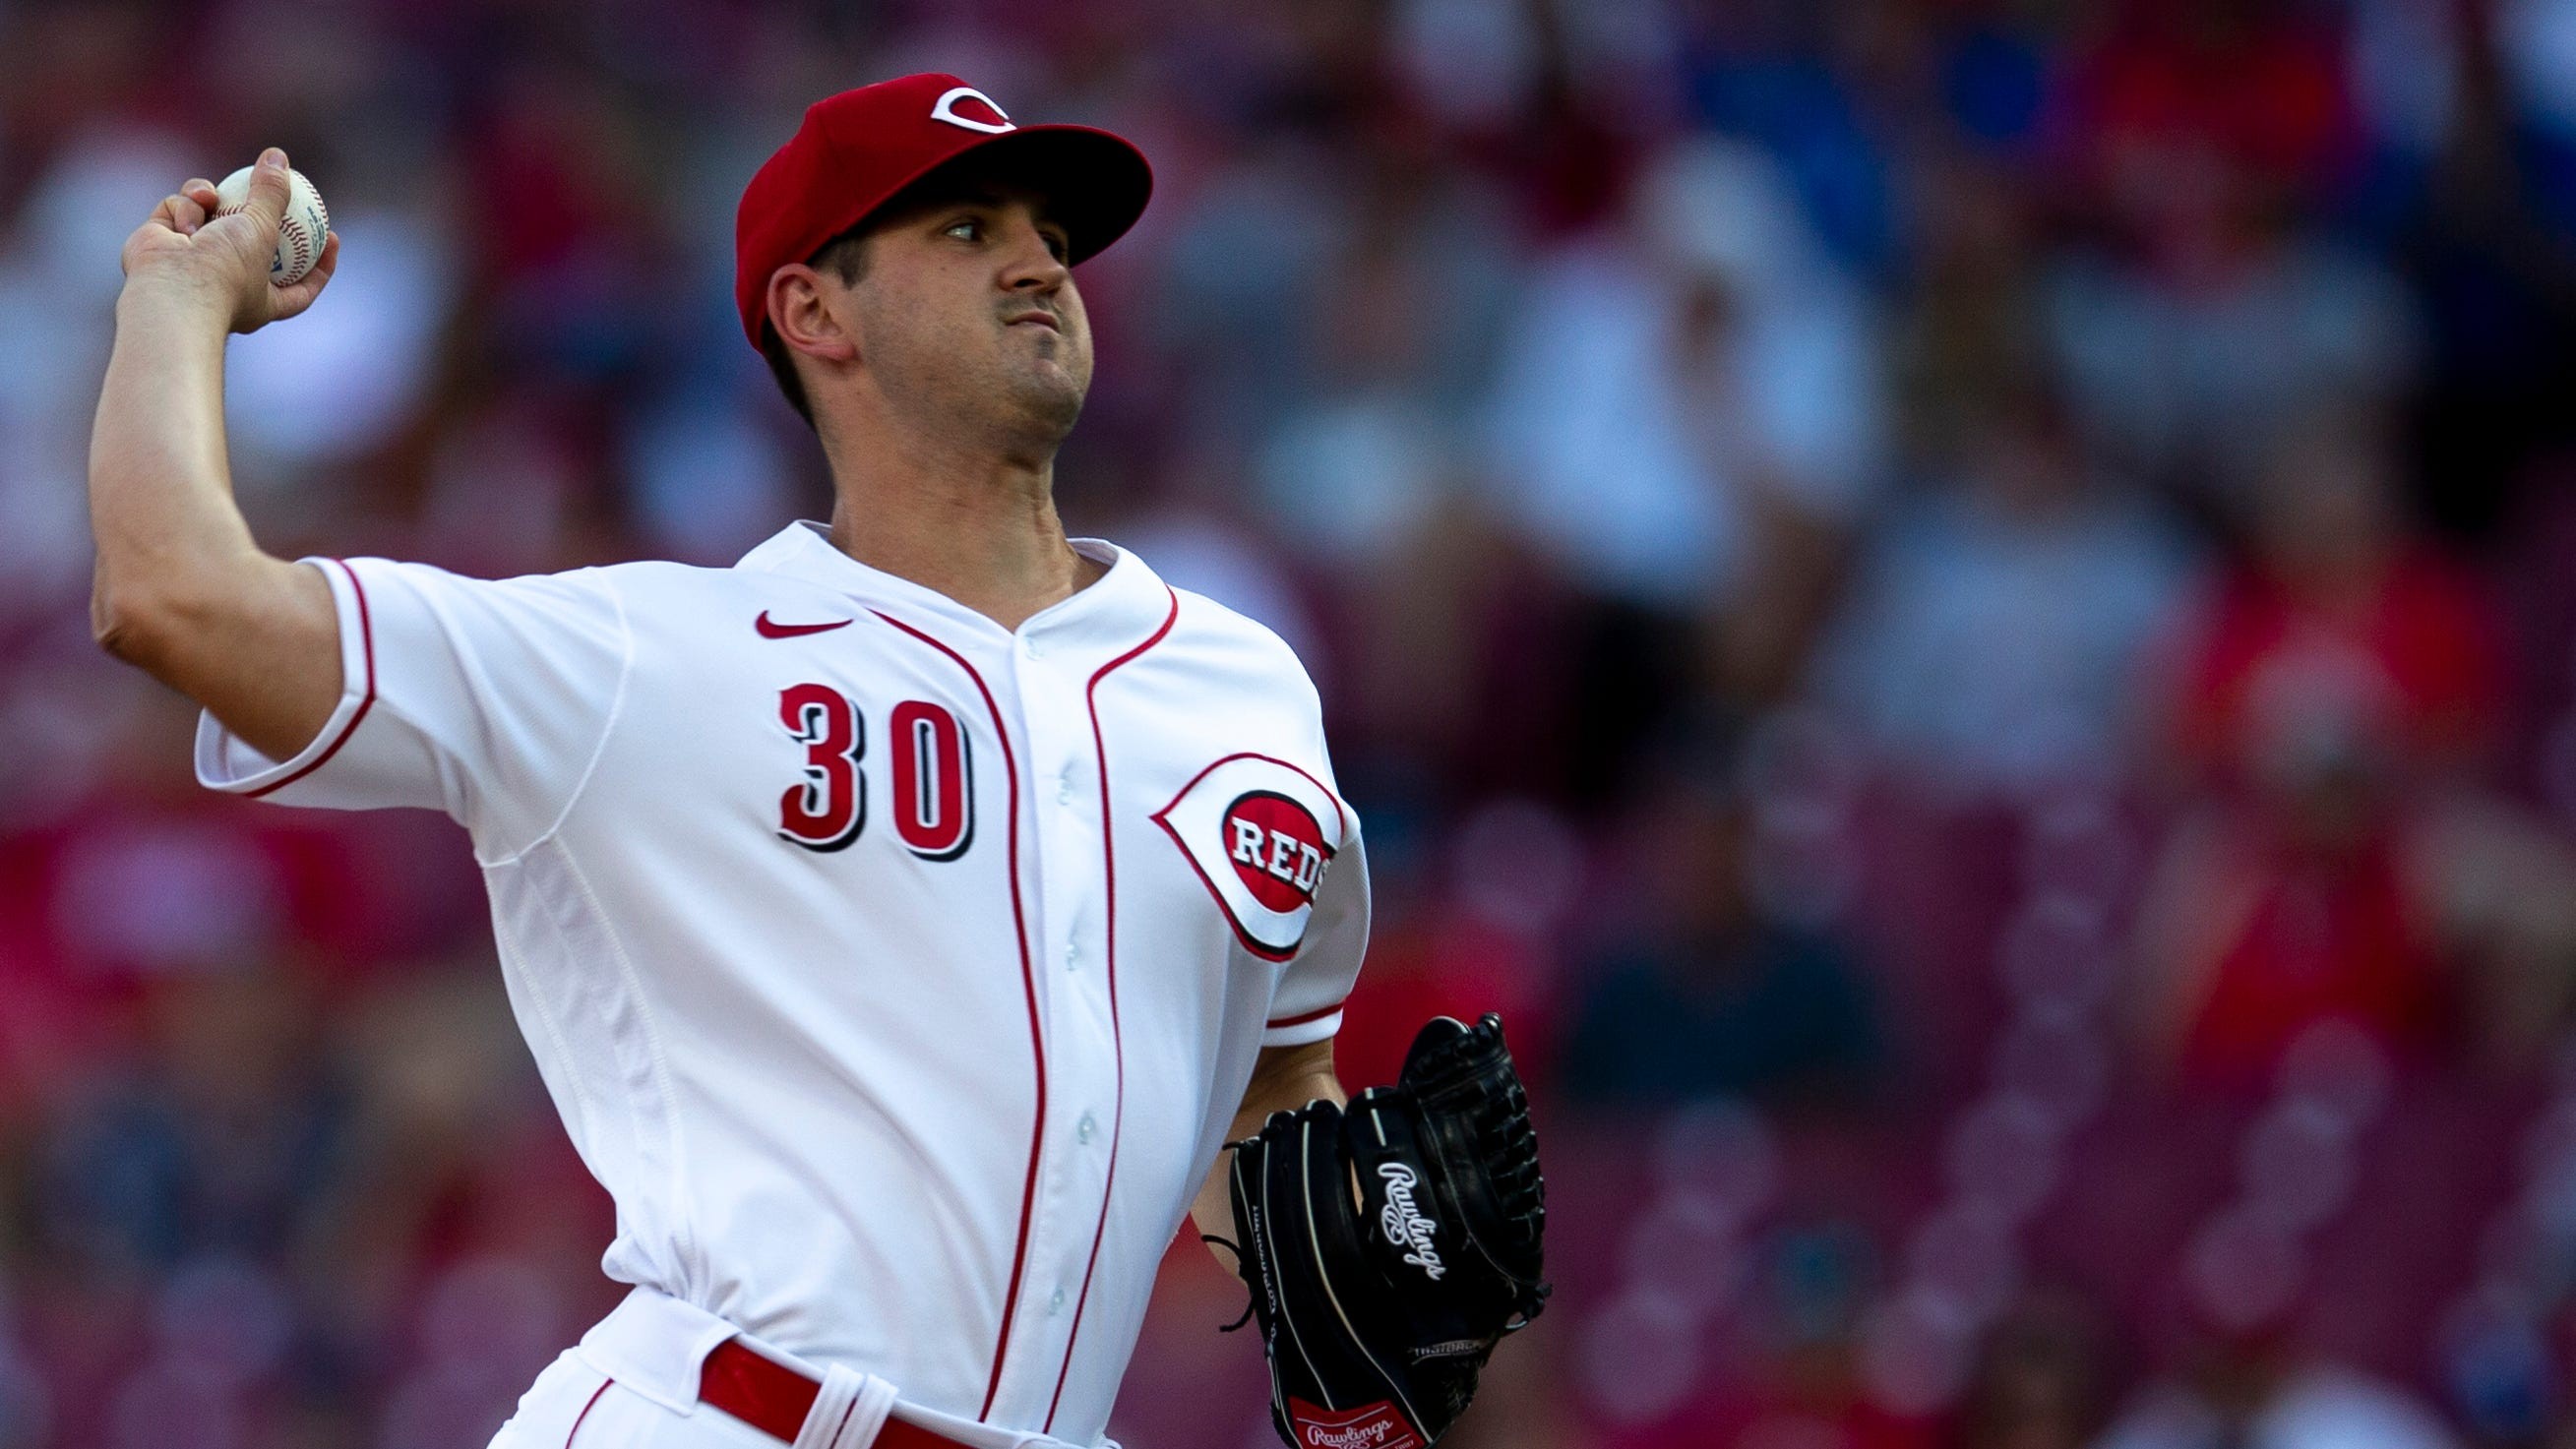 The Reds keep leaning on their starting pitching but drop series opener